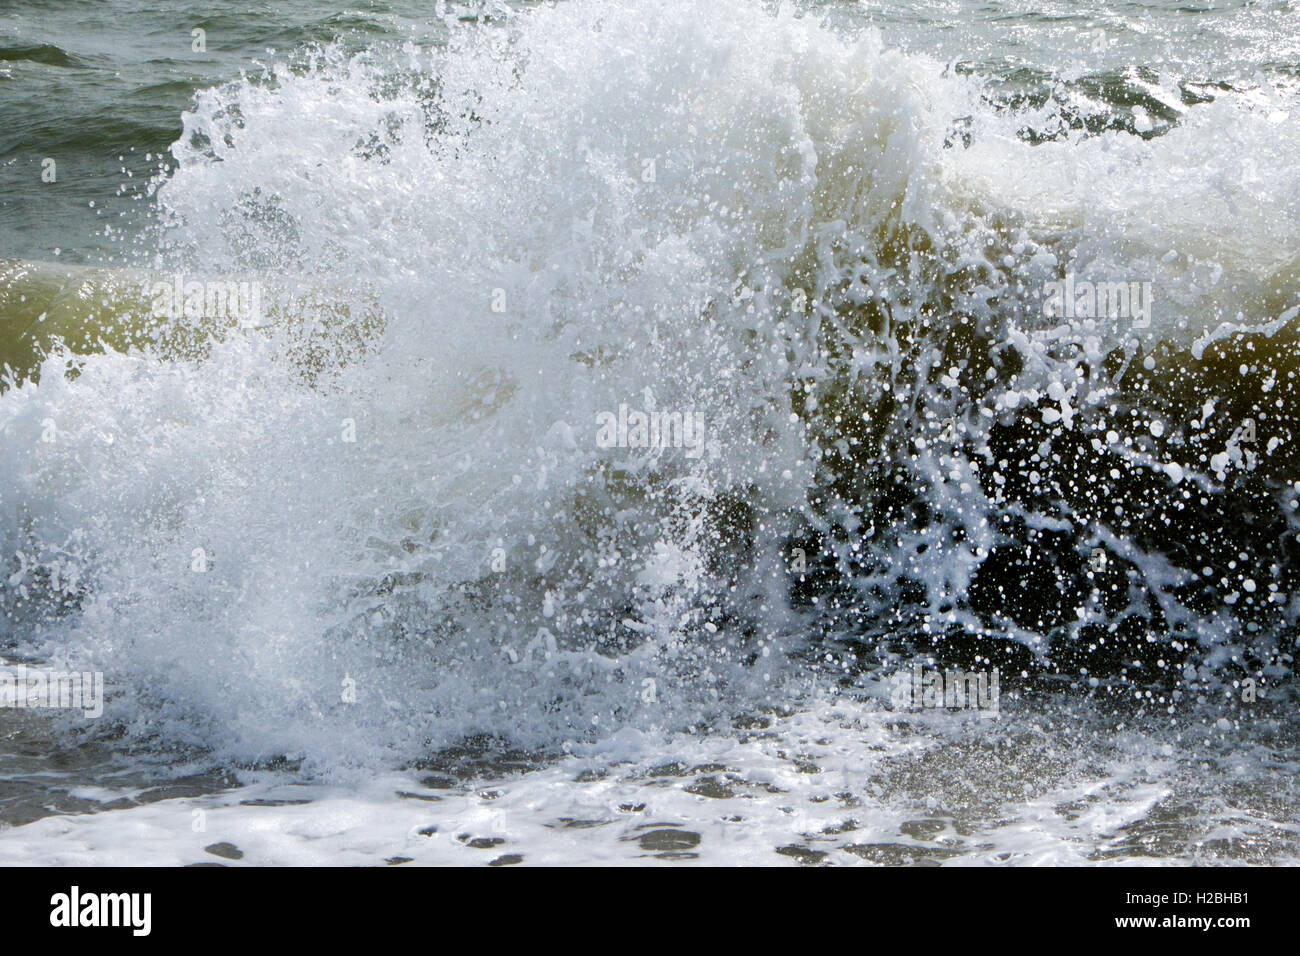 Close up of a Crashing wave breaking, lots of spray Stock Photo